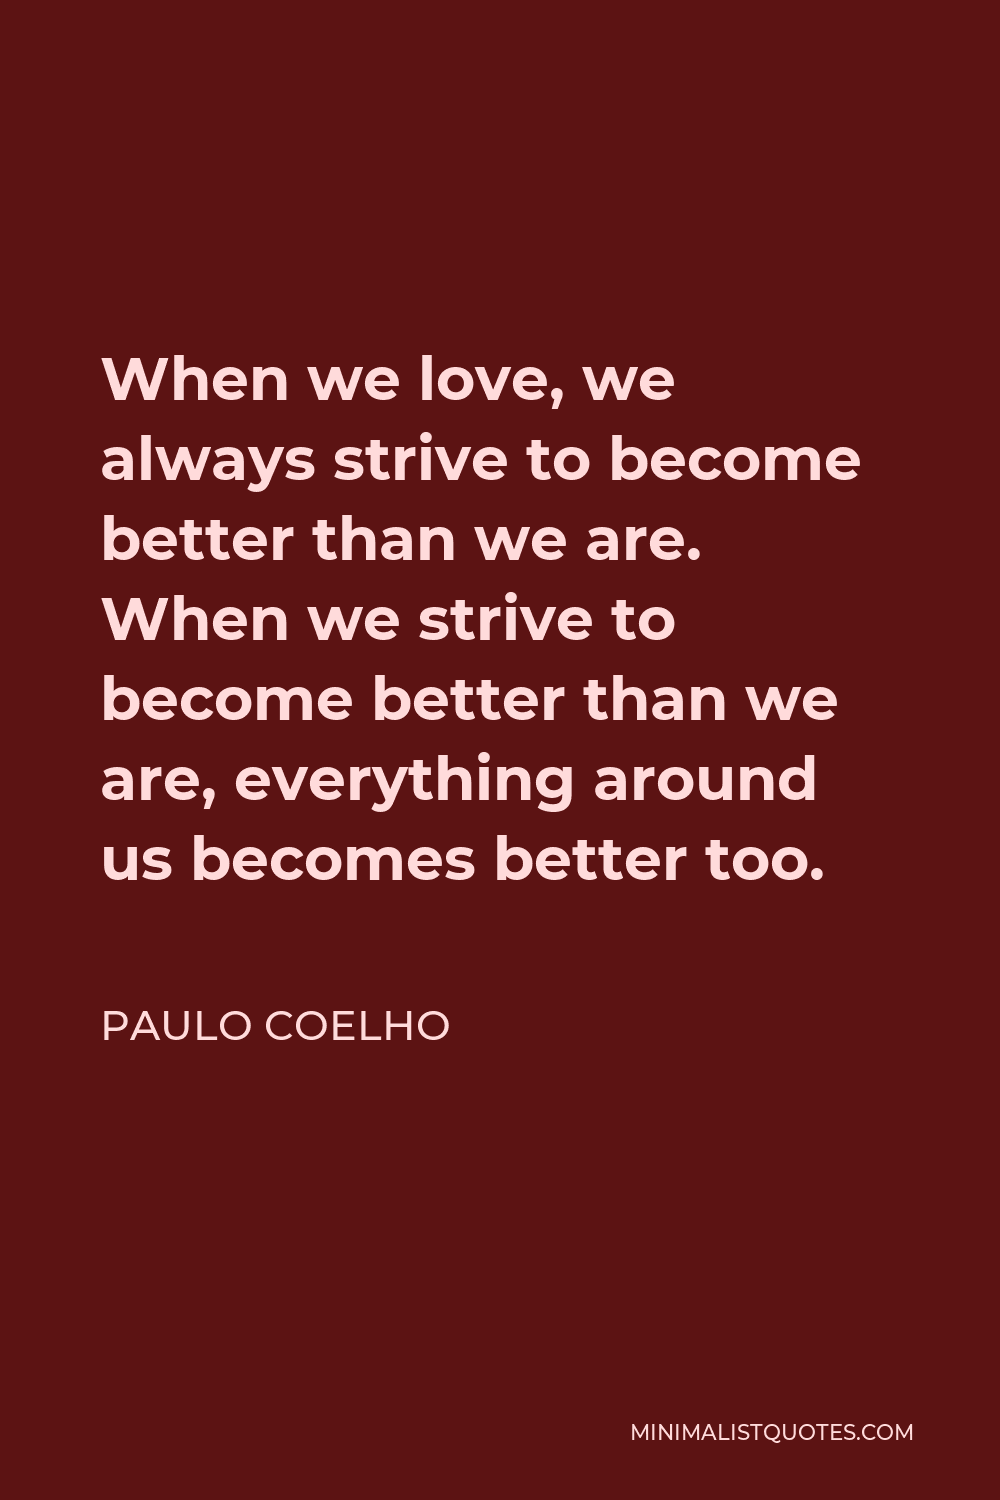 Paulo Coelho Quote: When we love, we always strive to become better ...